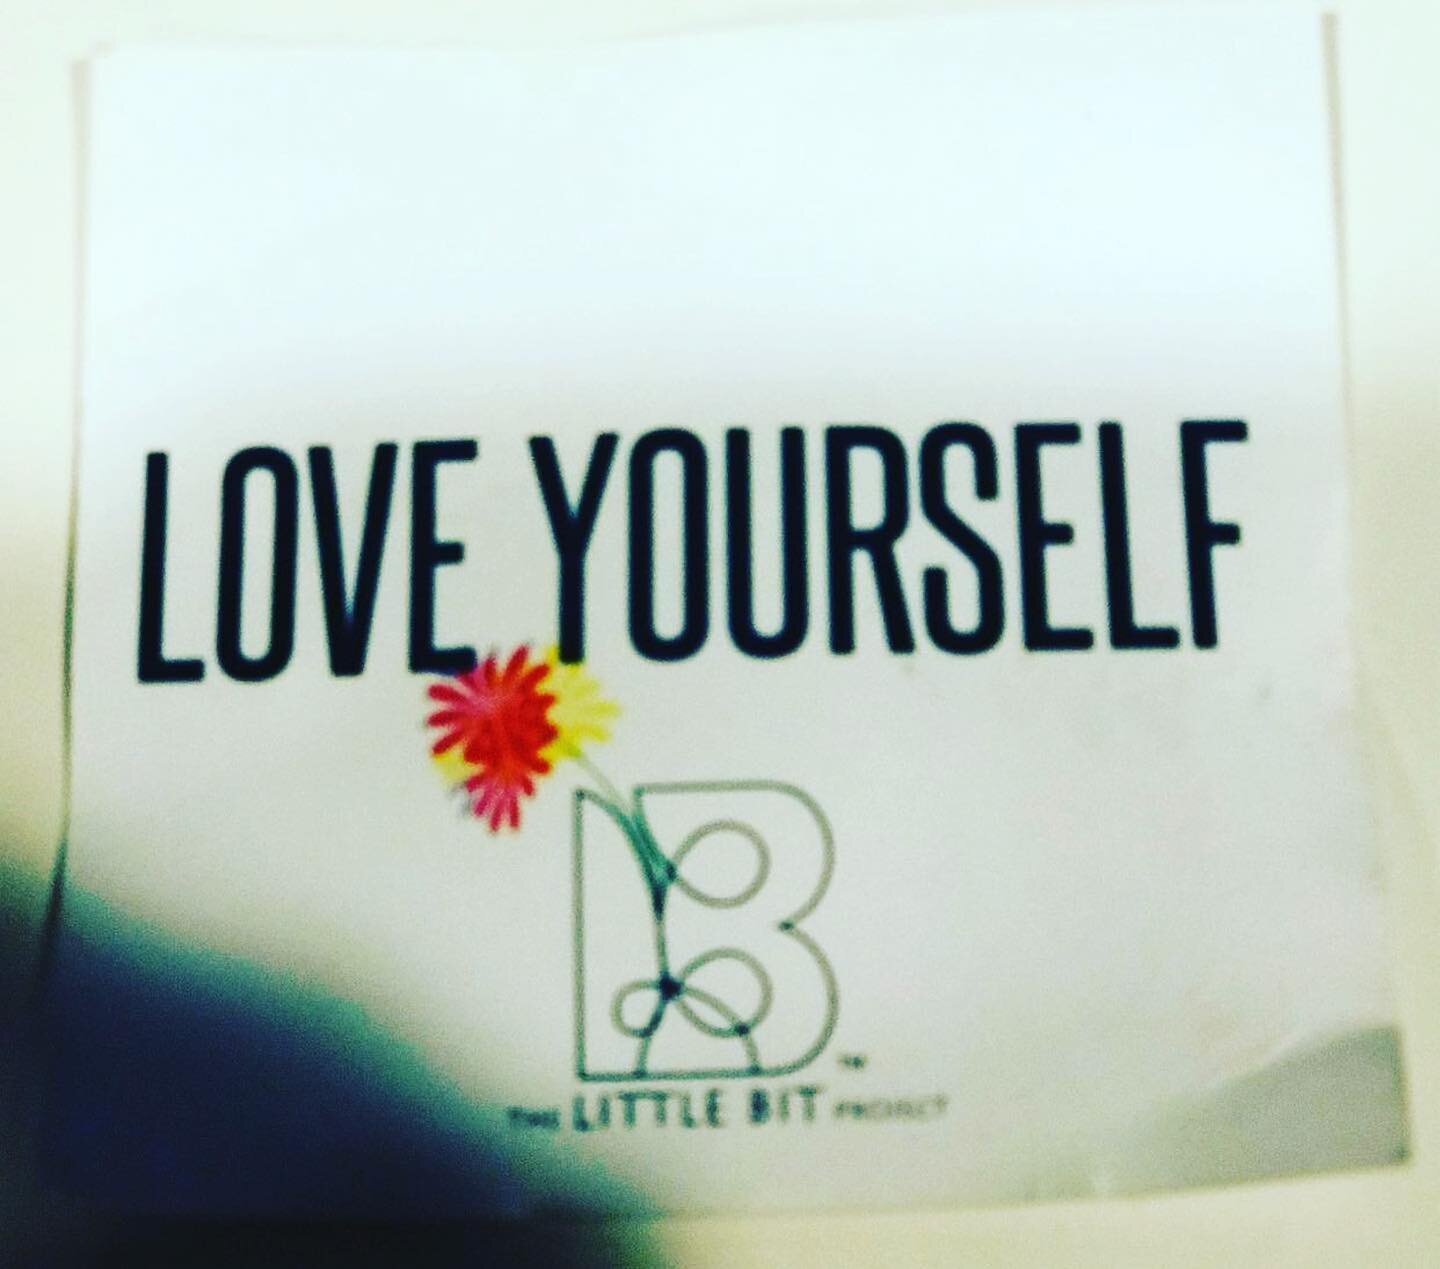 Let me add one more thing to your TO DO list. 

#Repost @rubygirlboi
・・・
Going through an old suitcase this morning &amp; come across this @diviniti. A reminder I so needed 🥰 

#thelittlebitproject #affirmations #affirmationcards #loveyourself #dail